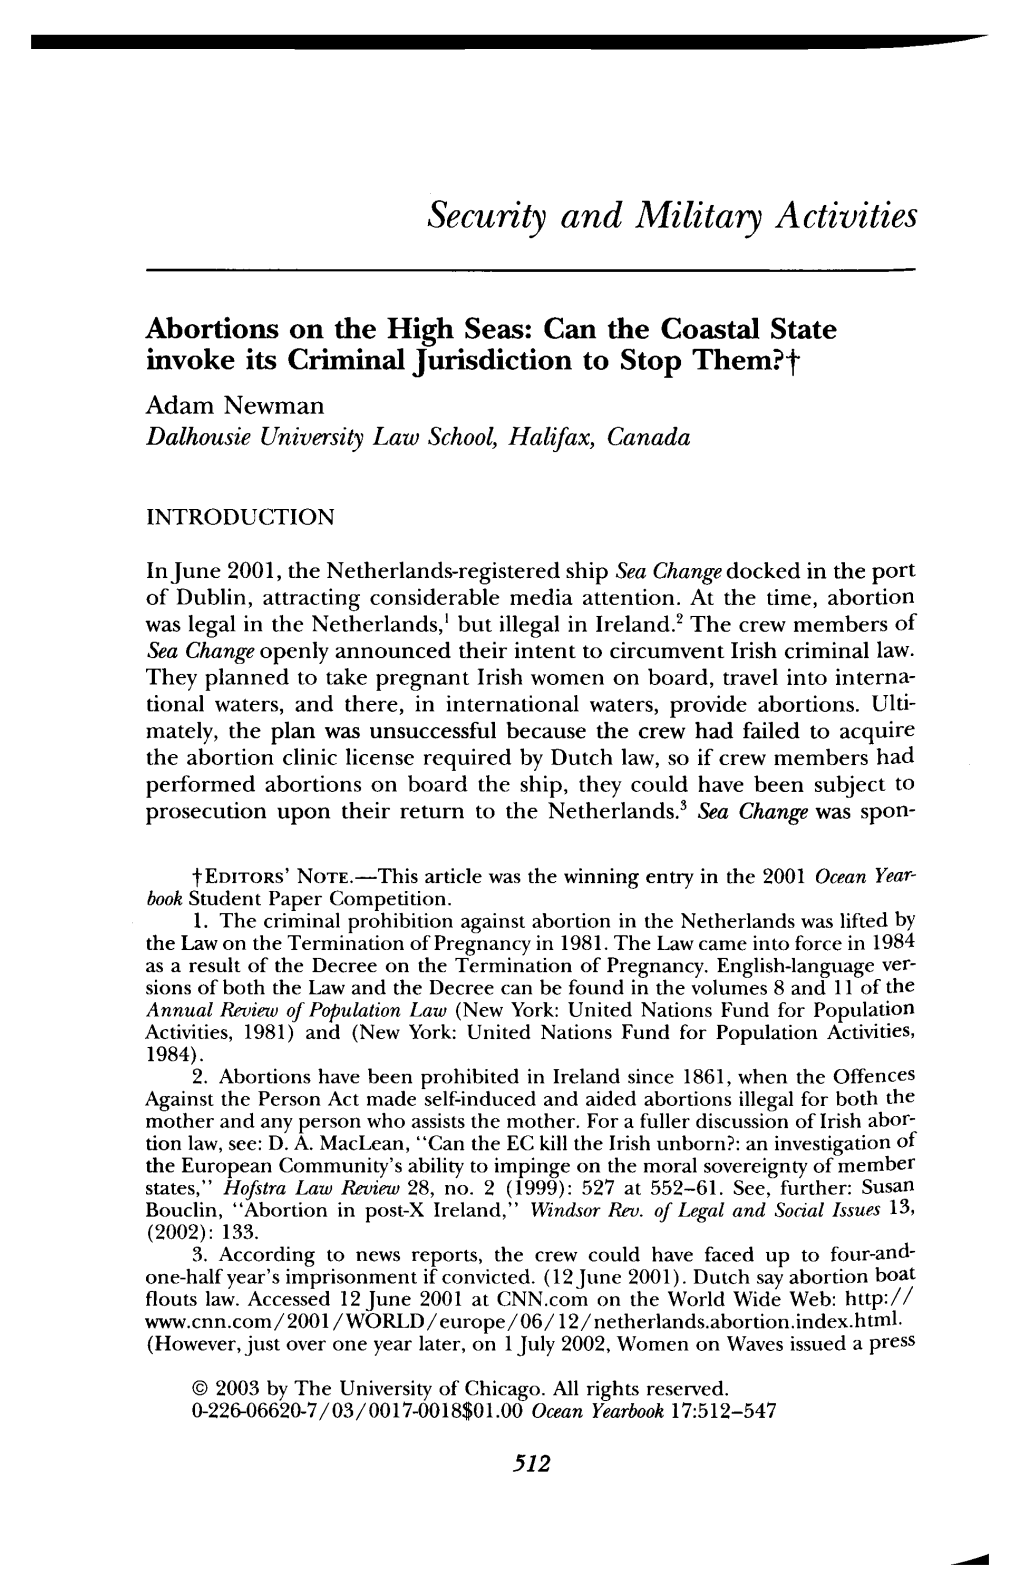 Abortions on the High Seas: Can the Coastal State Invoke Its Criminal Jurisdiction to Stop Them?T Adam Newman Dalhousie University Law School, Halifax, Canada